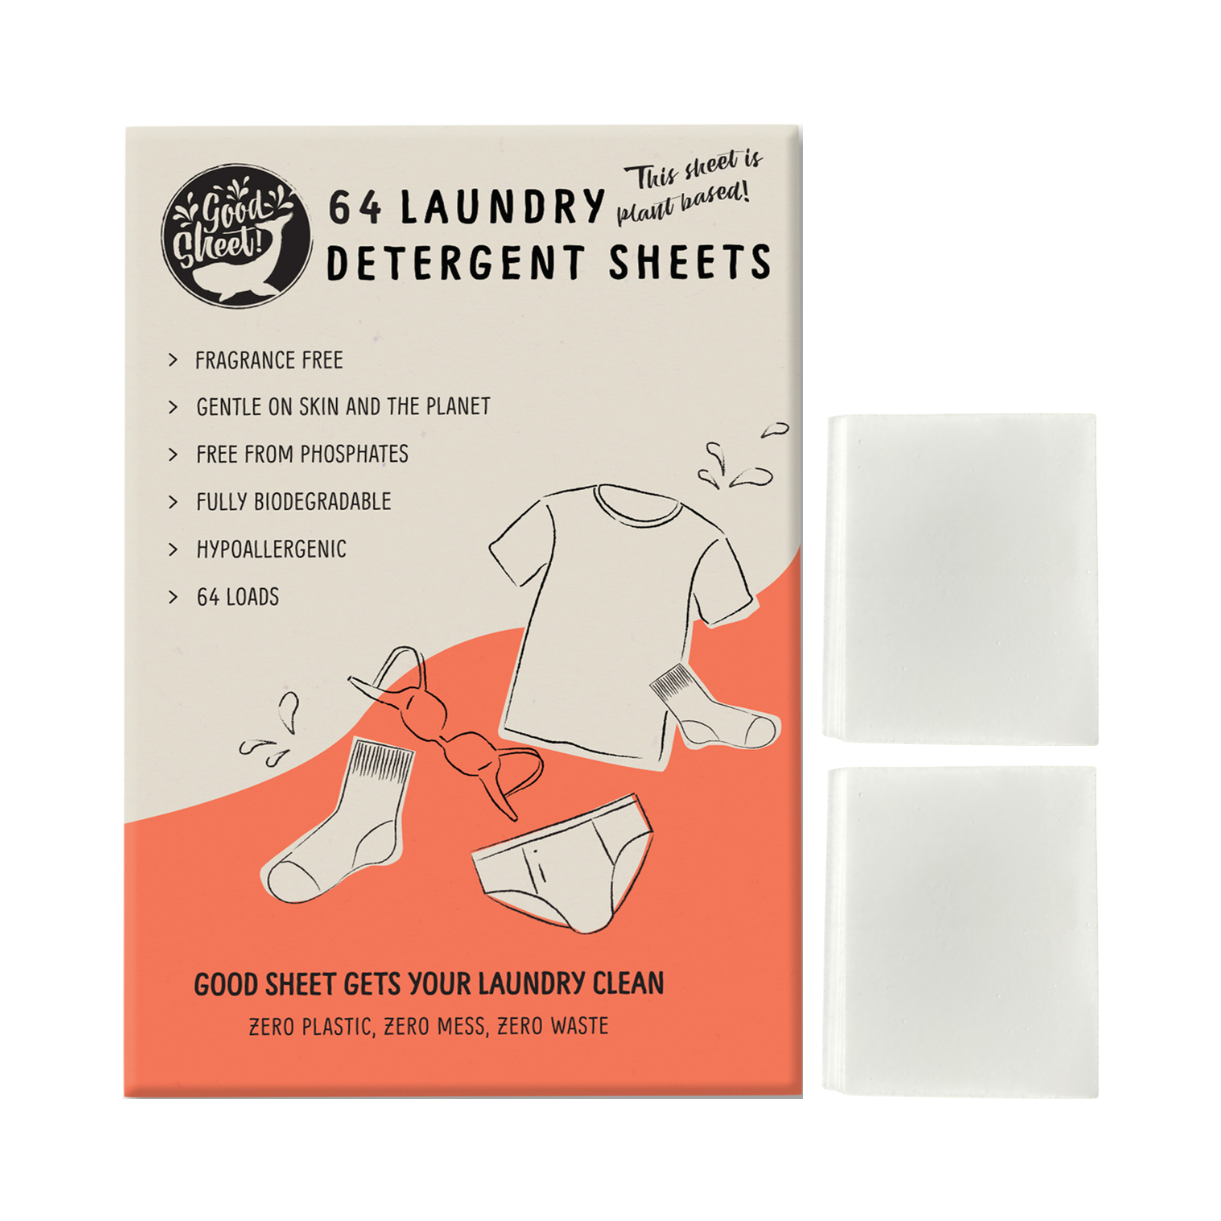 64 Laundry Detergent Sheets Fragrance Free